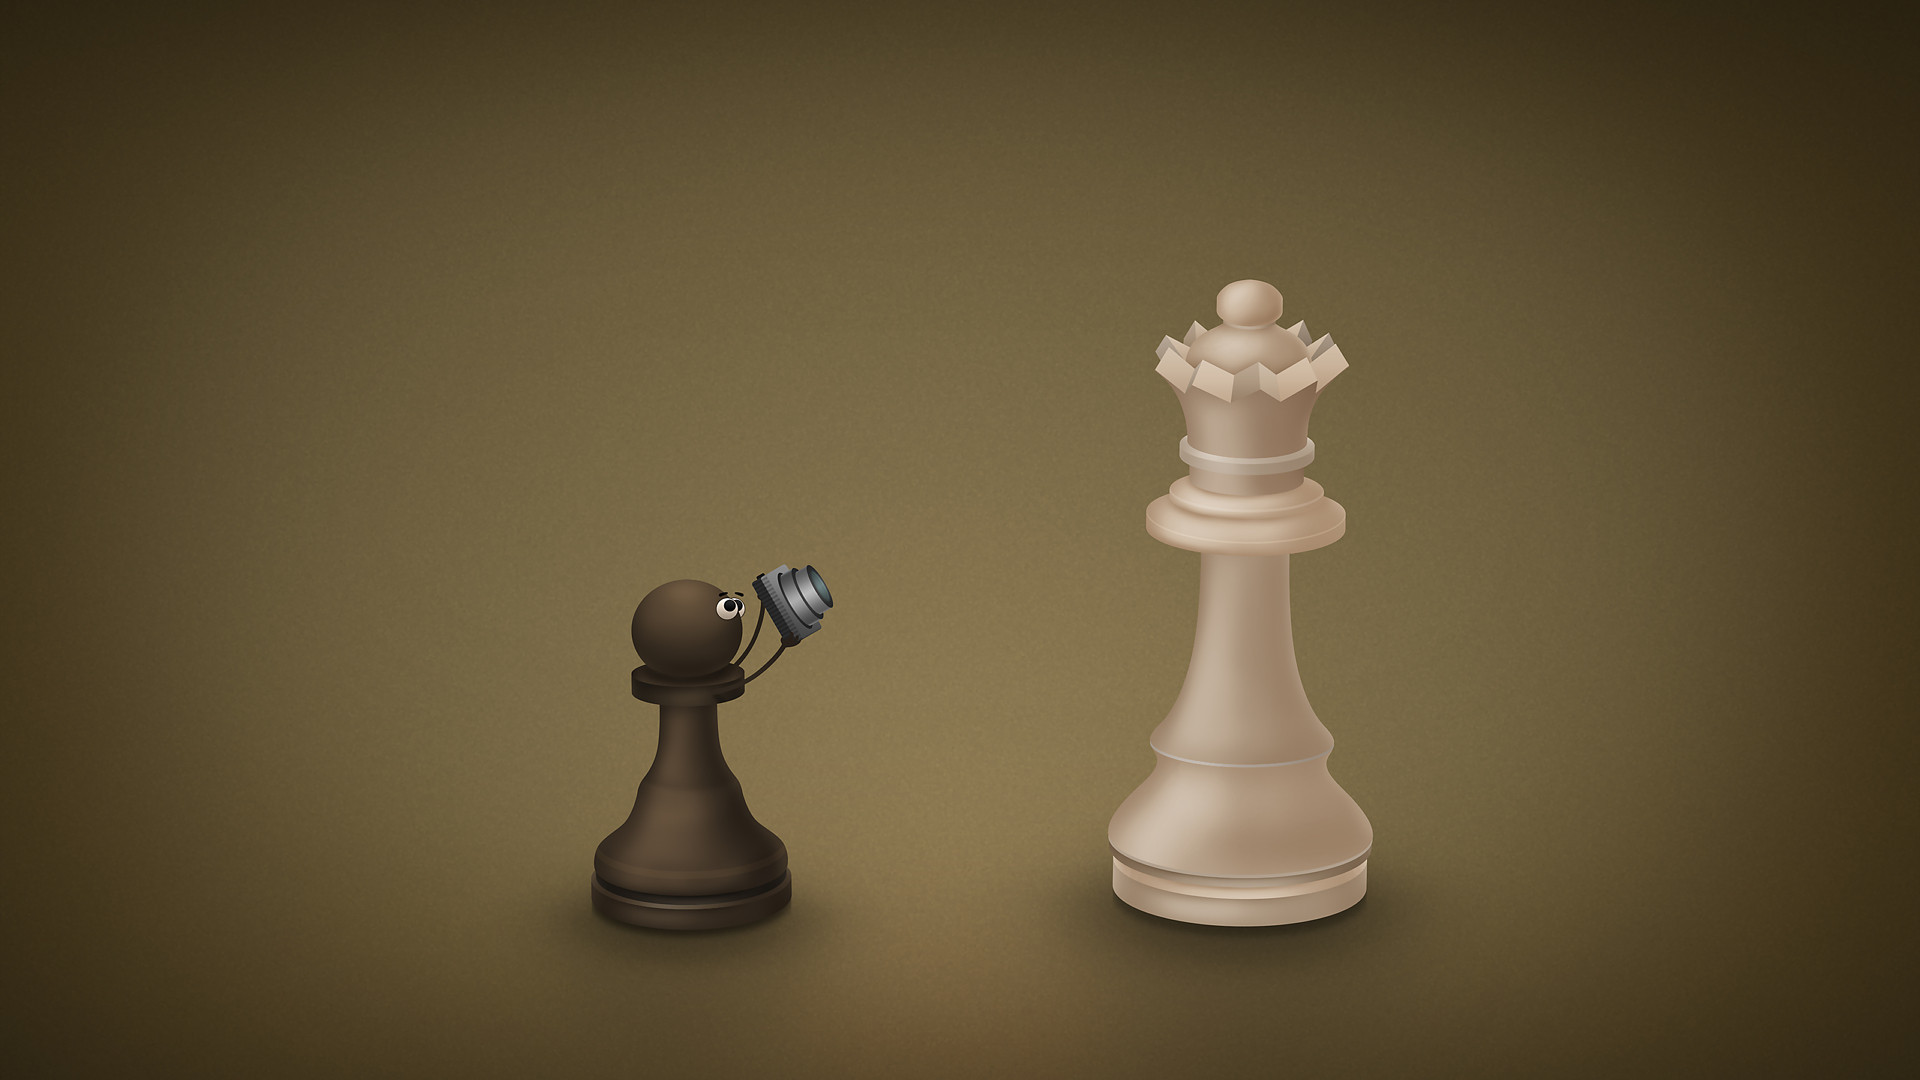 1920x1080 something you don't see too often: a chess wallpaper. found on /r/wallpapers.  enjoy!